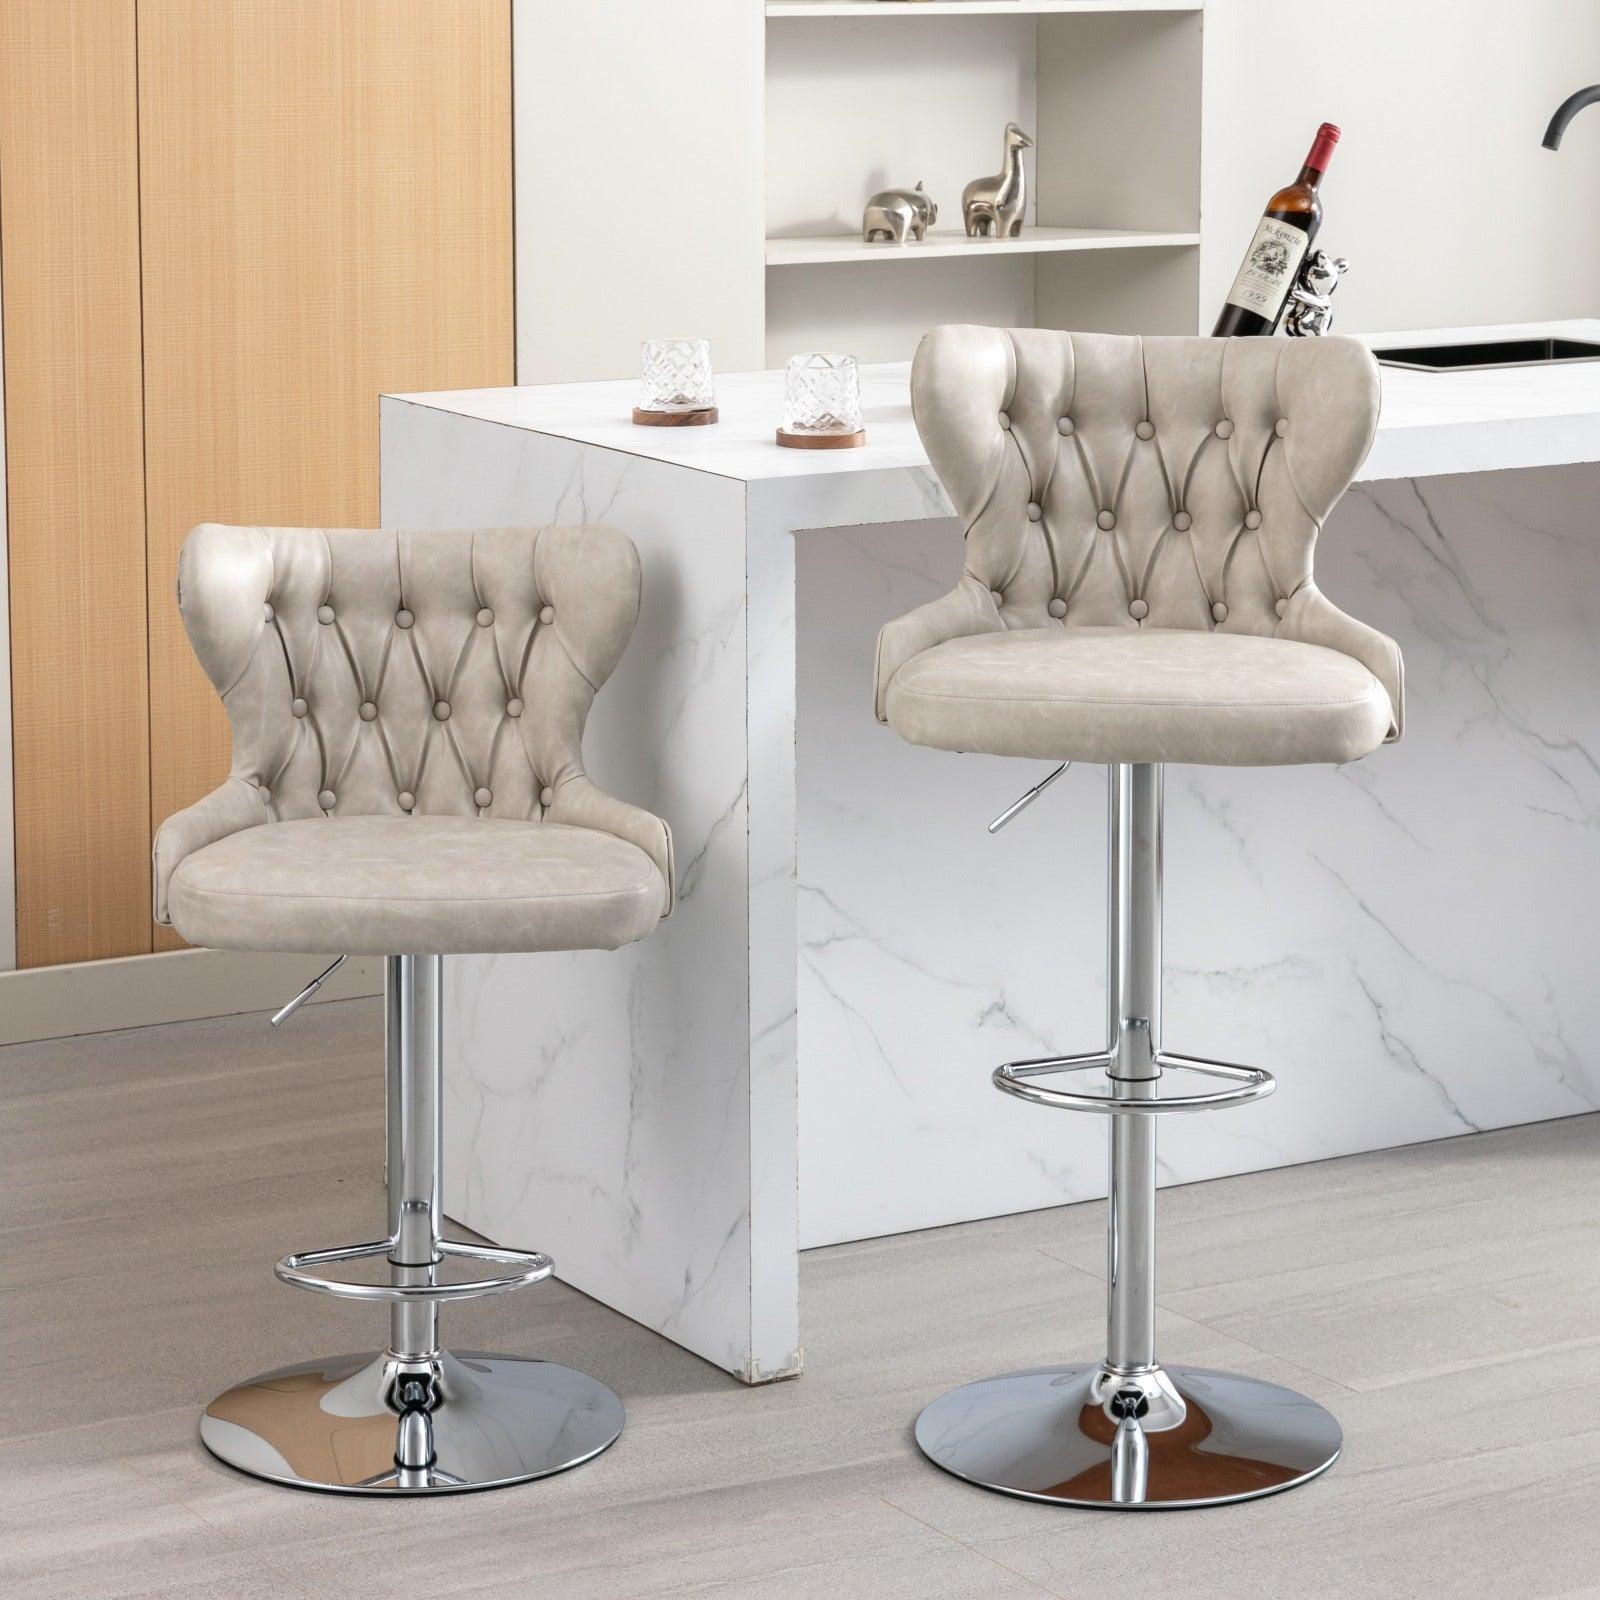 🆓🚛 Swivel Pu Barstools Adjusatble Seat Height From 25-33 Inch, Modern Upholstered Chrome Base Bar Stools With Backs Comfortable Tufted for Home Pub & Kitchen Island, Beige